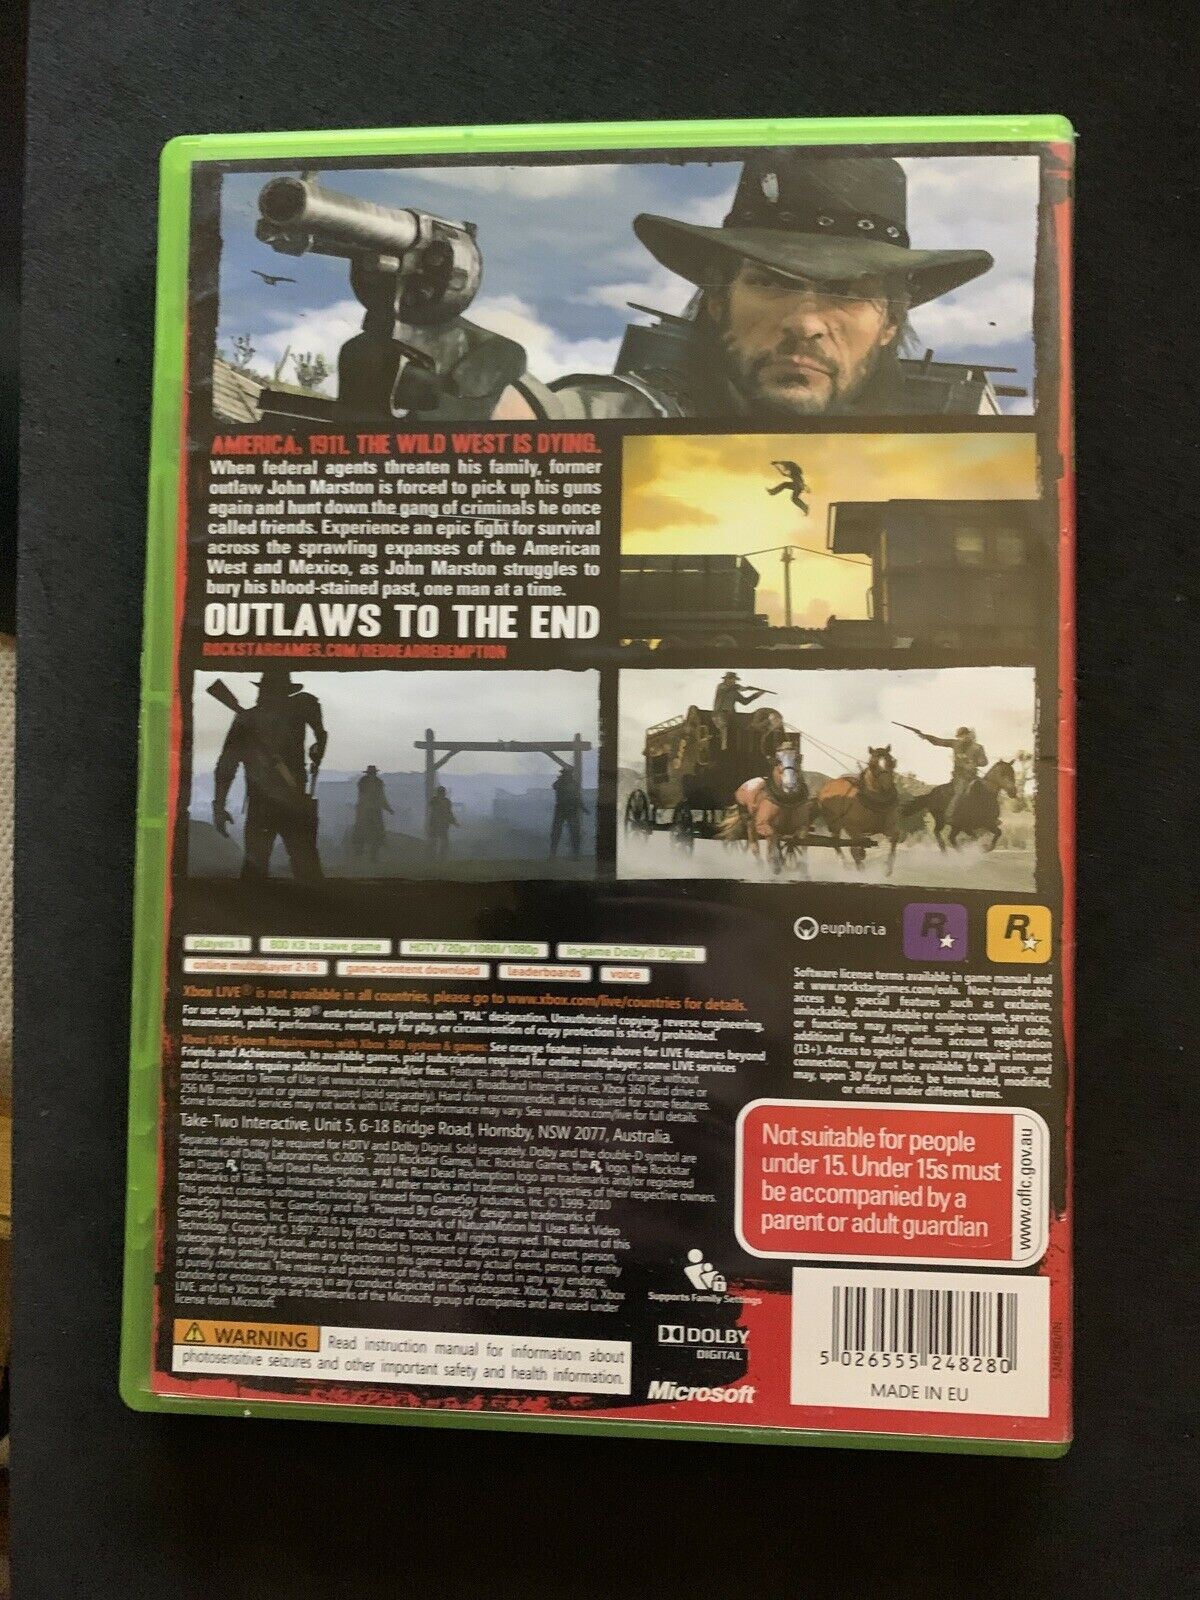 Red Dead Redemption - Microsoft Xbox 360 PAL with Manual Rockstar